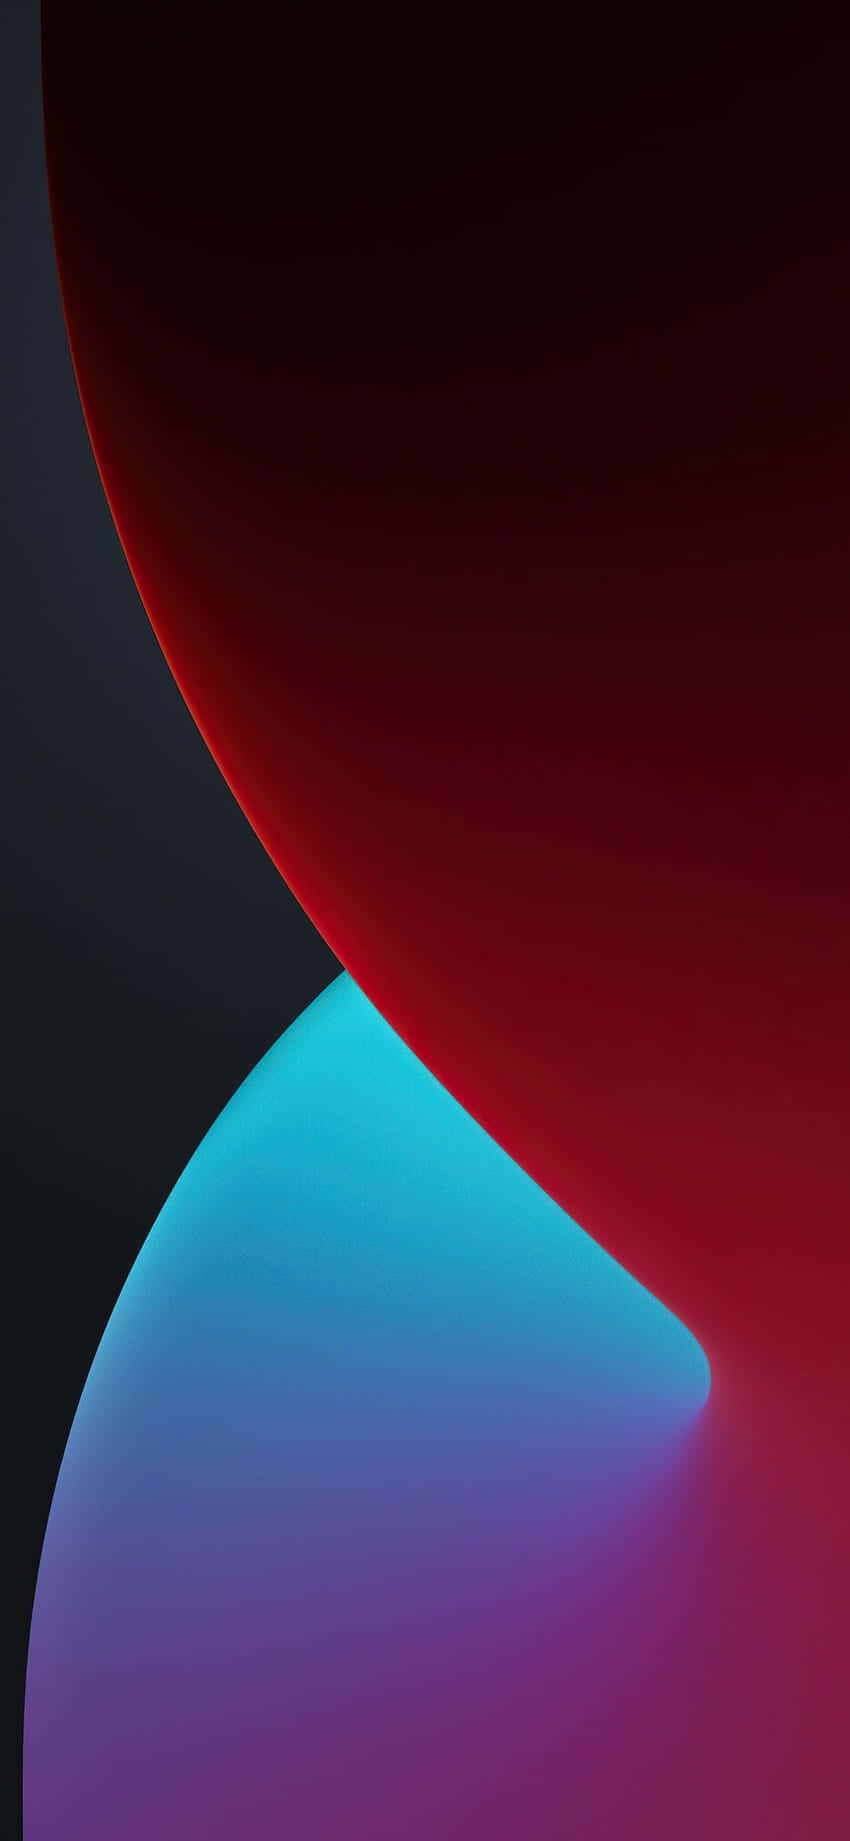 Apple's flagship Iphone 2020 - the ultimate in smartphone technology Wallpaper